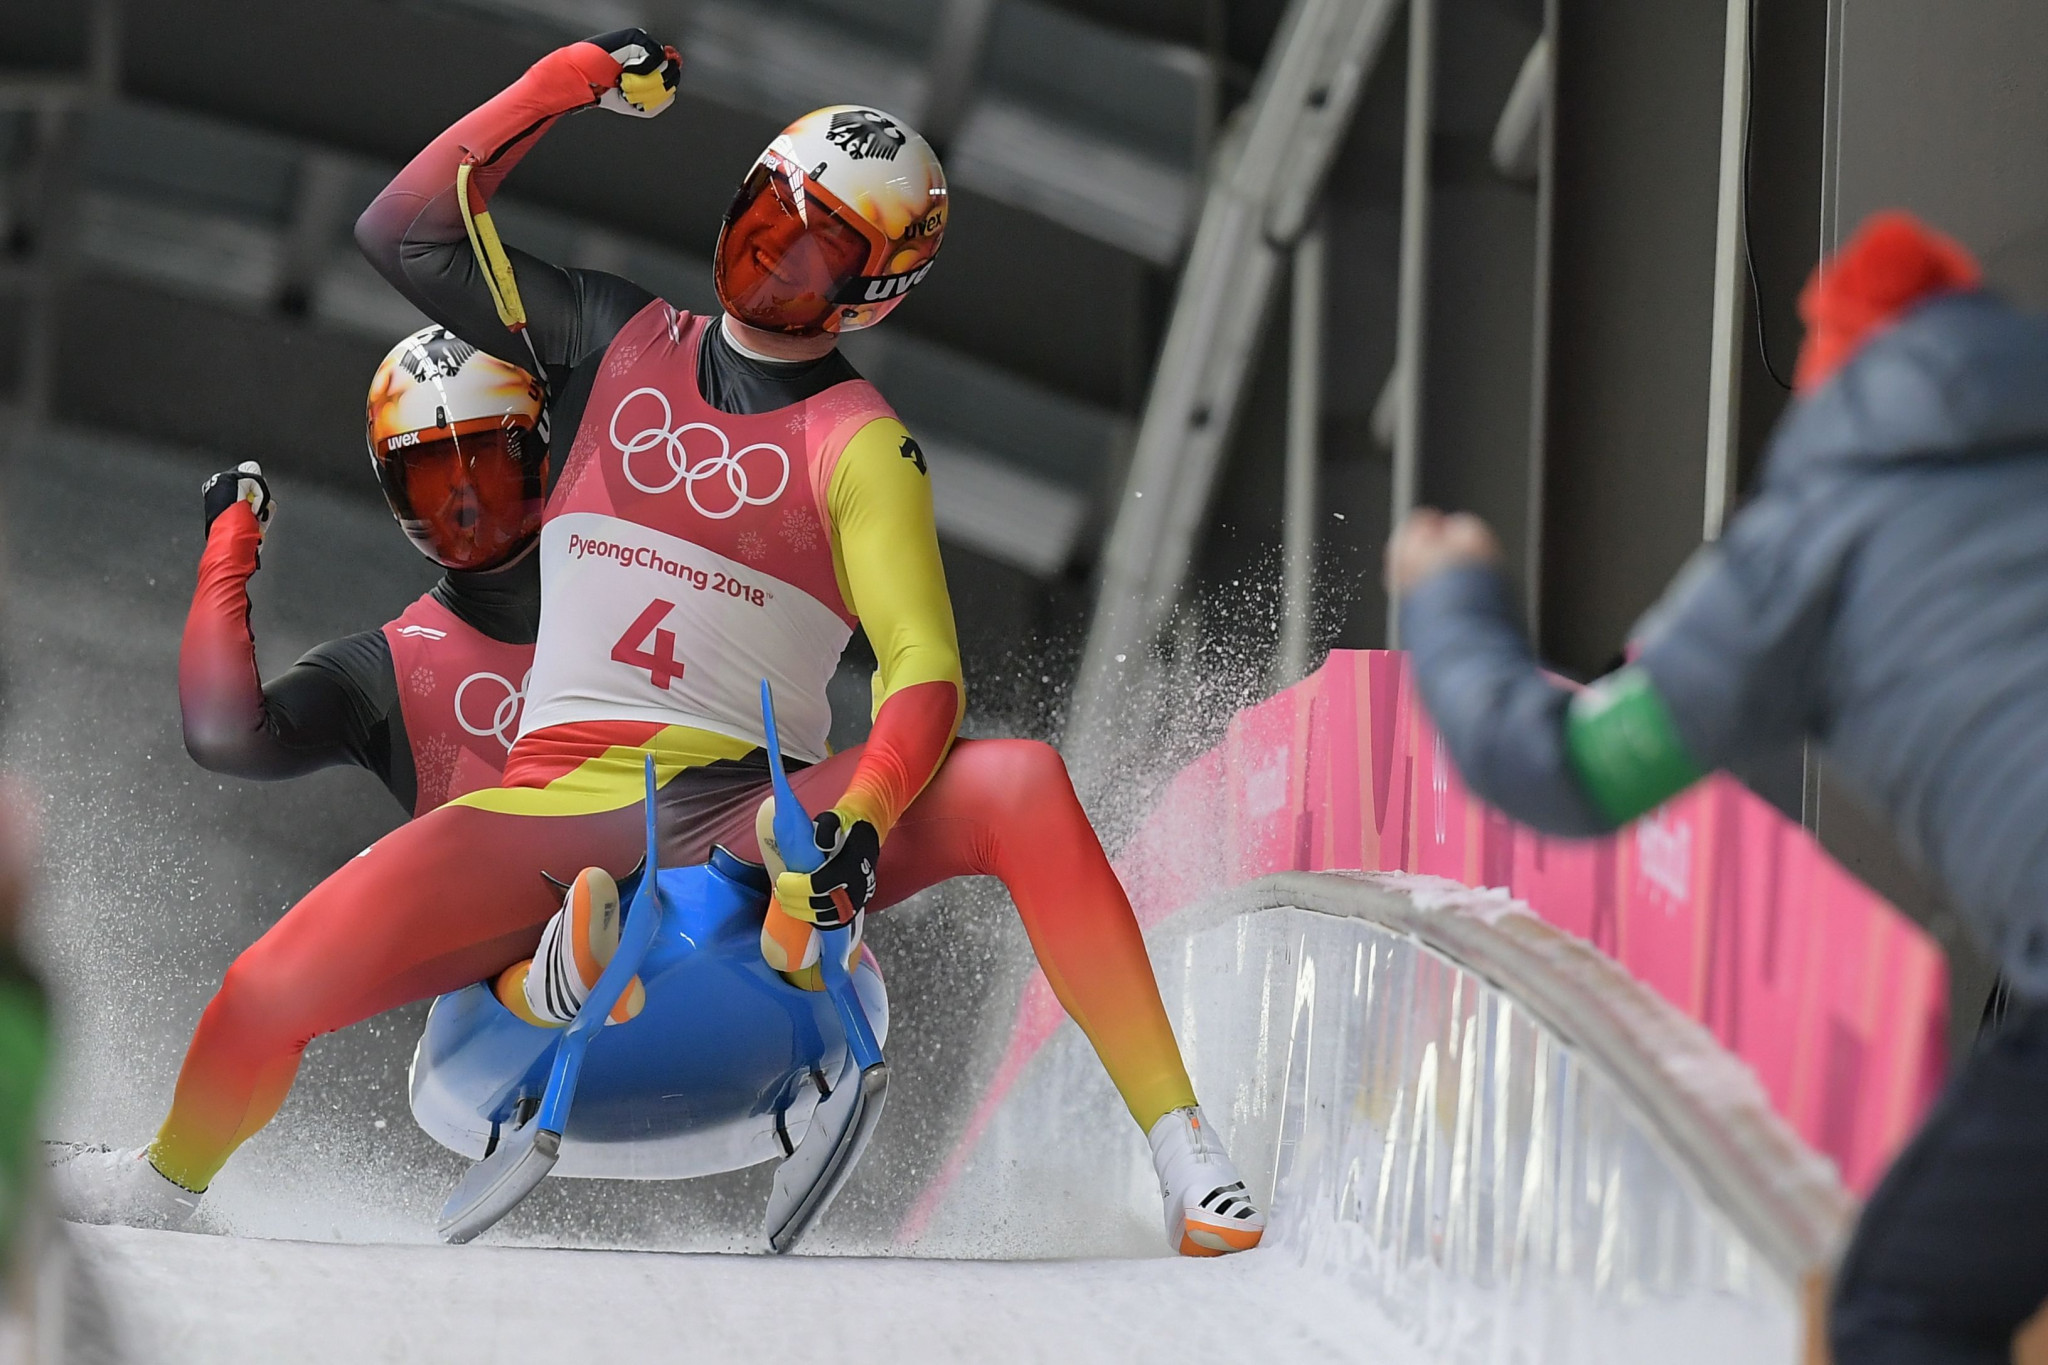 Germany's Toni Eggert and Sascha Benecken claimed the doubles Olympic bronze medal at  Pyeongchang 2018 ©Getty Images